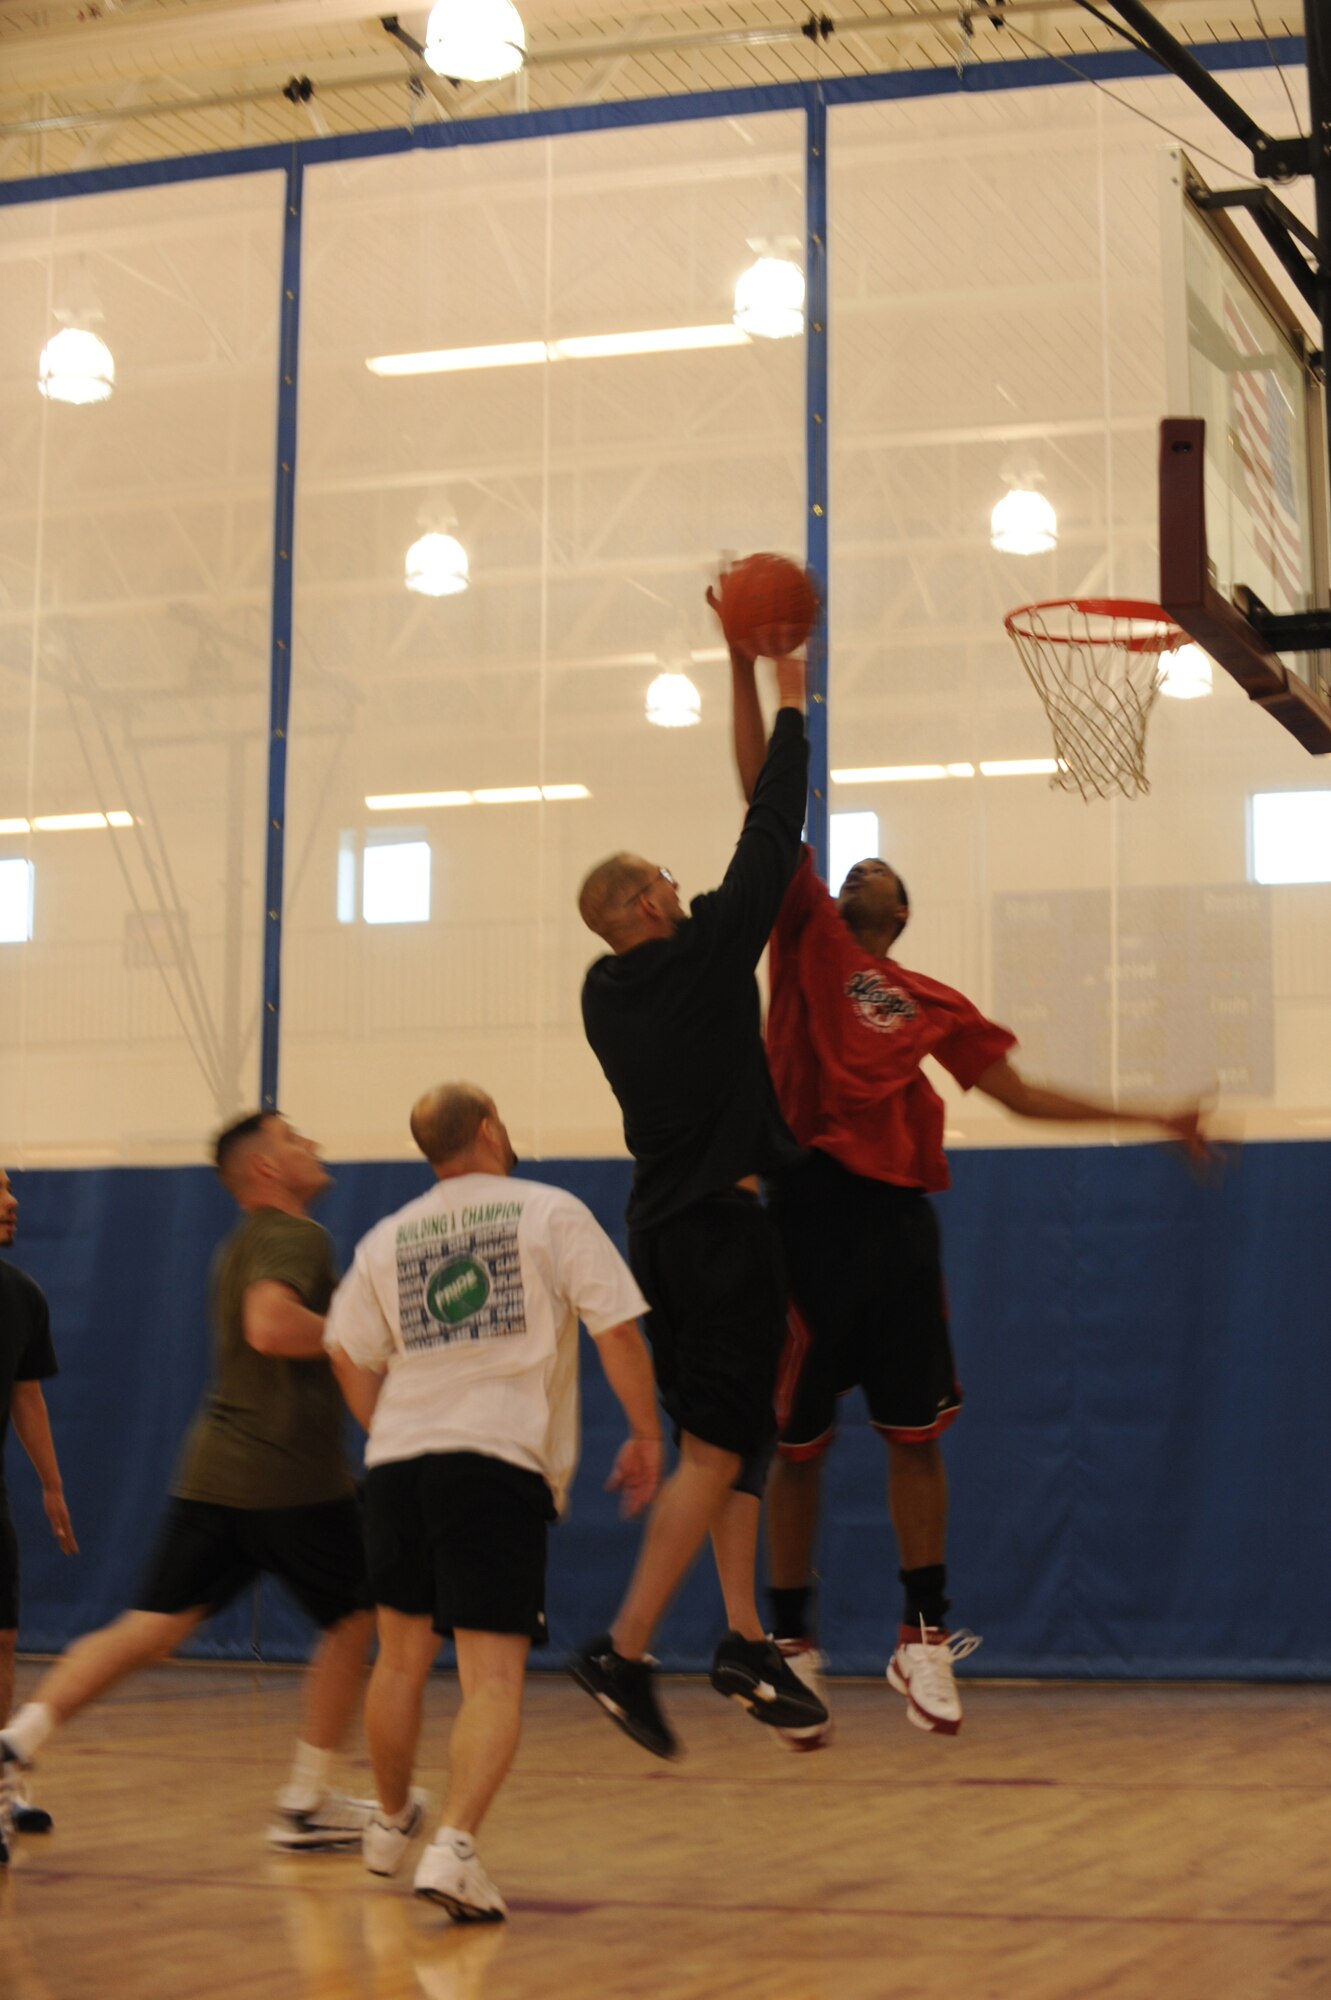 BUCKLEY AIR FORCE BASE, Colo. -- Staff Sgt. Alfred Davis, 4th Manpower Requirements Squadron, blocks Marine Corps Staff Sgt. Joseph Barotti, Marine Air Control Squadron 23, as he goes up for a shot during the 3 on 3 Hoops Classic at the base Fitness Center Jan. 27. (U.S. Air Force by Airman 1st Class Marcy Glass)